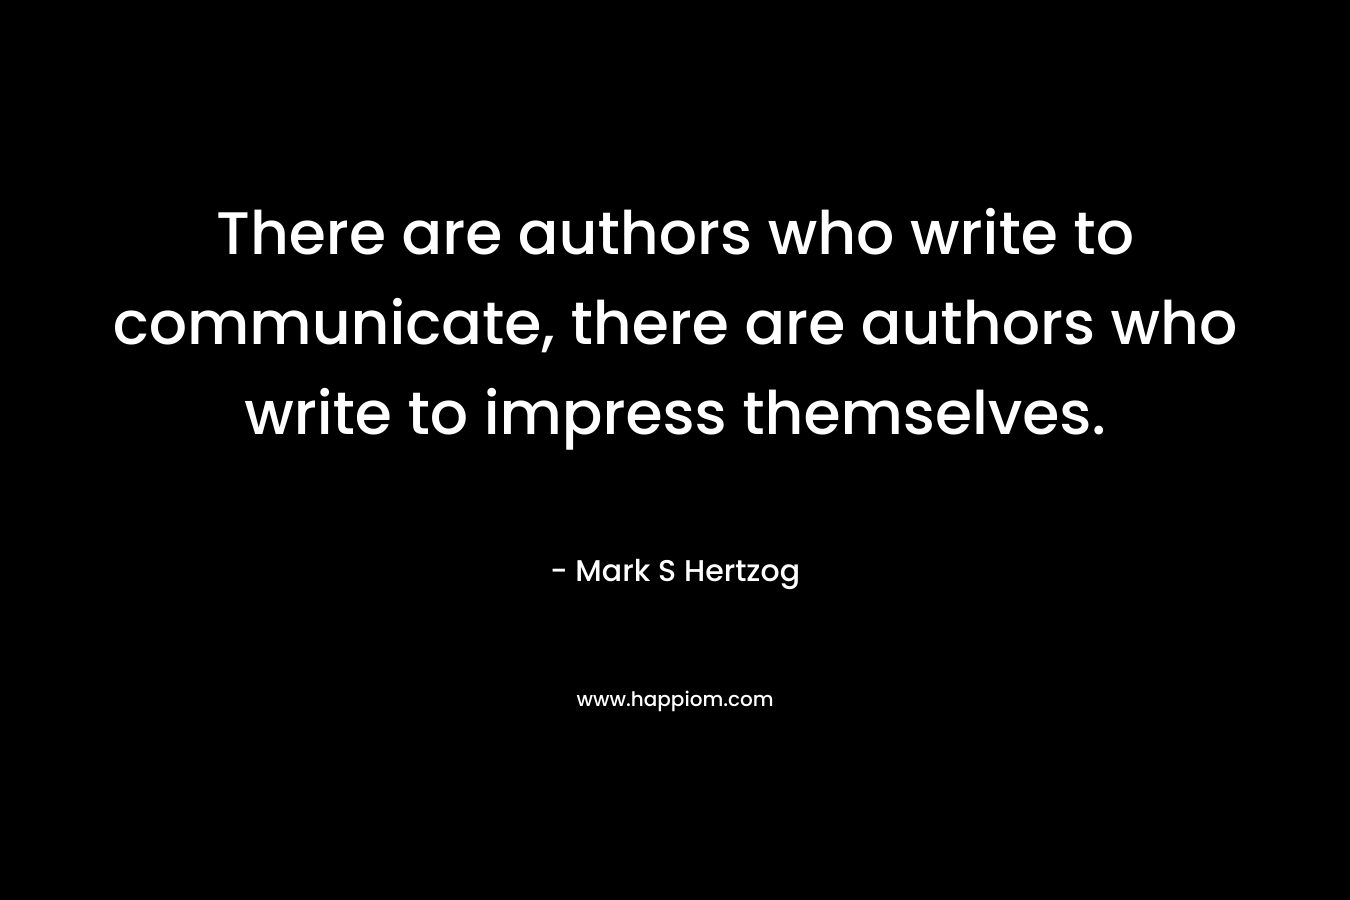 There are authors who write to communicate, there are authors who write to impress themselves. – Mark S Hertzog